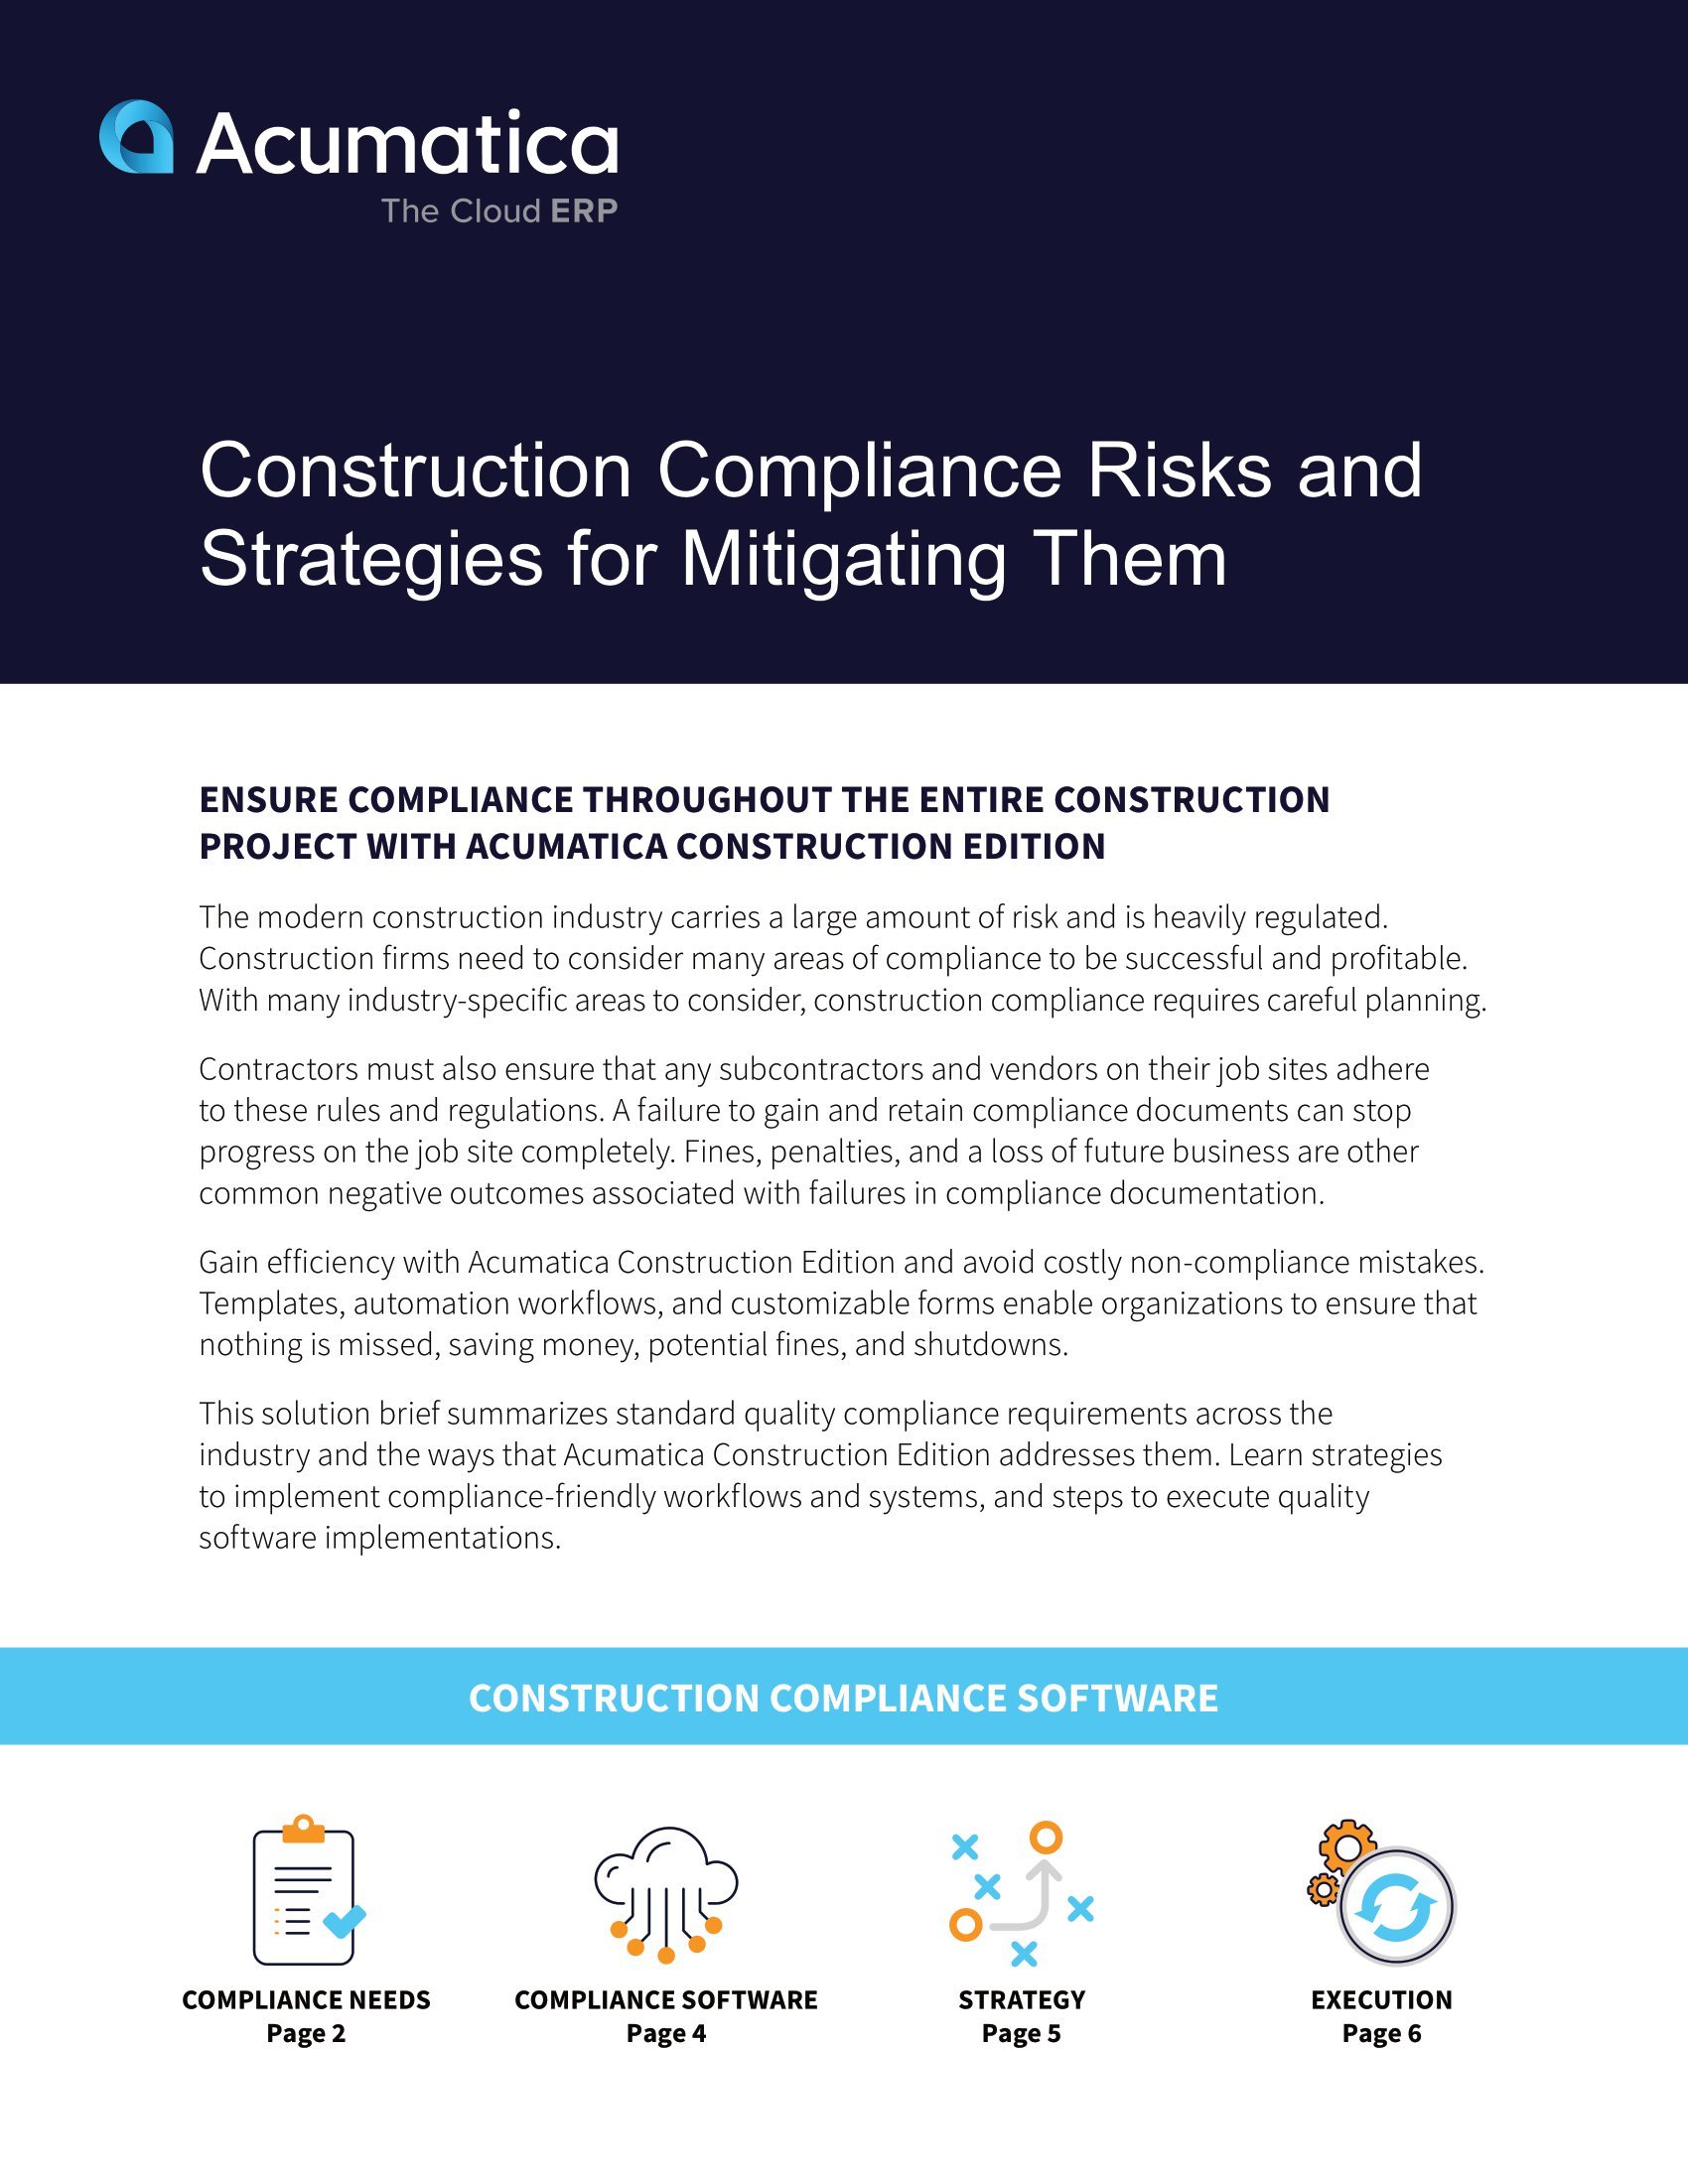 Simplify Construction Compliance with a Complete Cloud ERP Solution